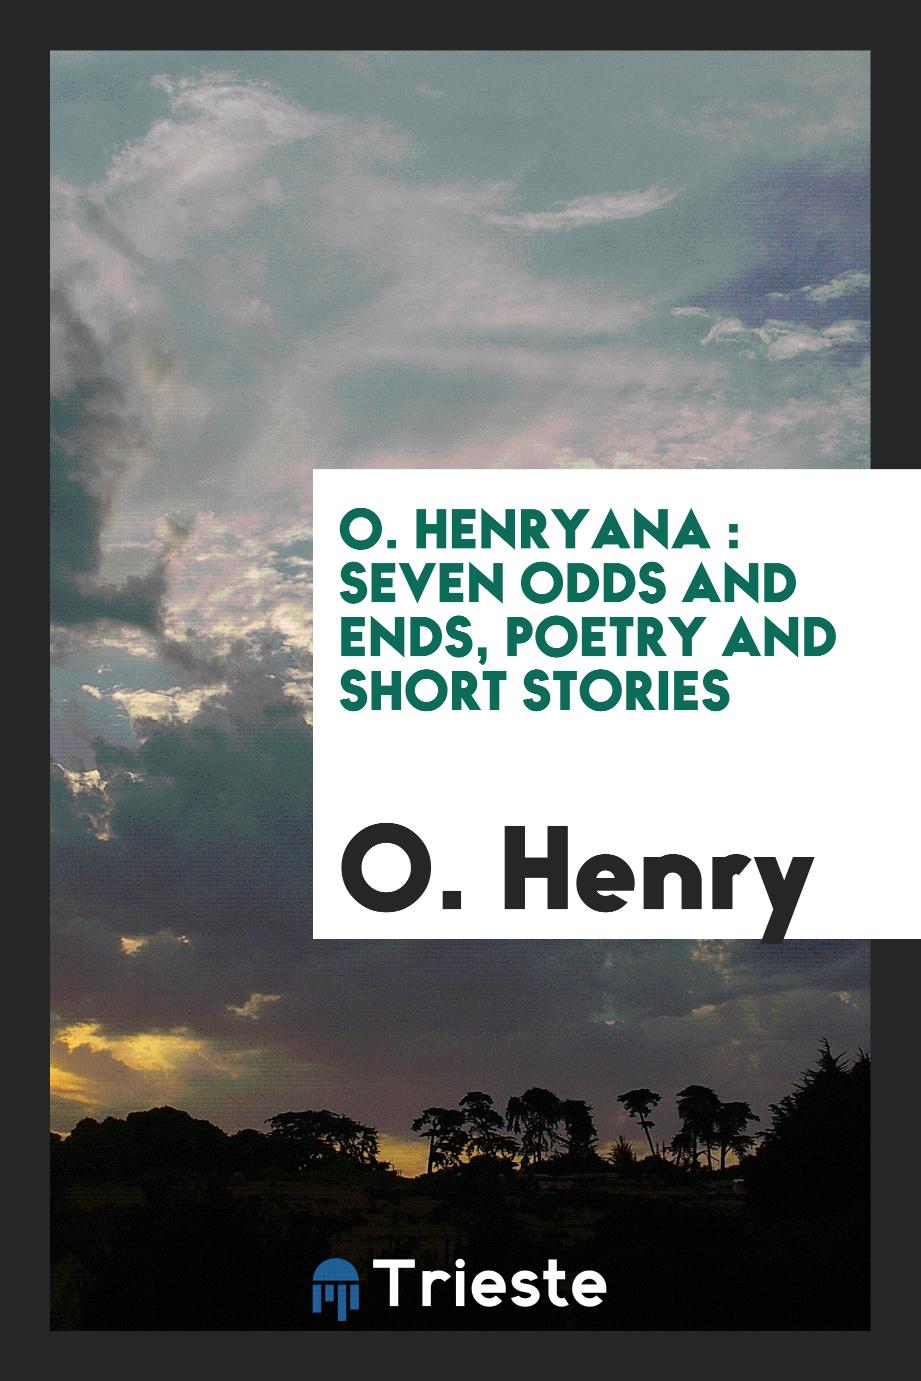 O. Henryana : seven odds and ends, poetry and short stories